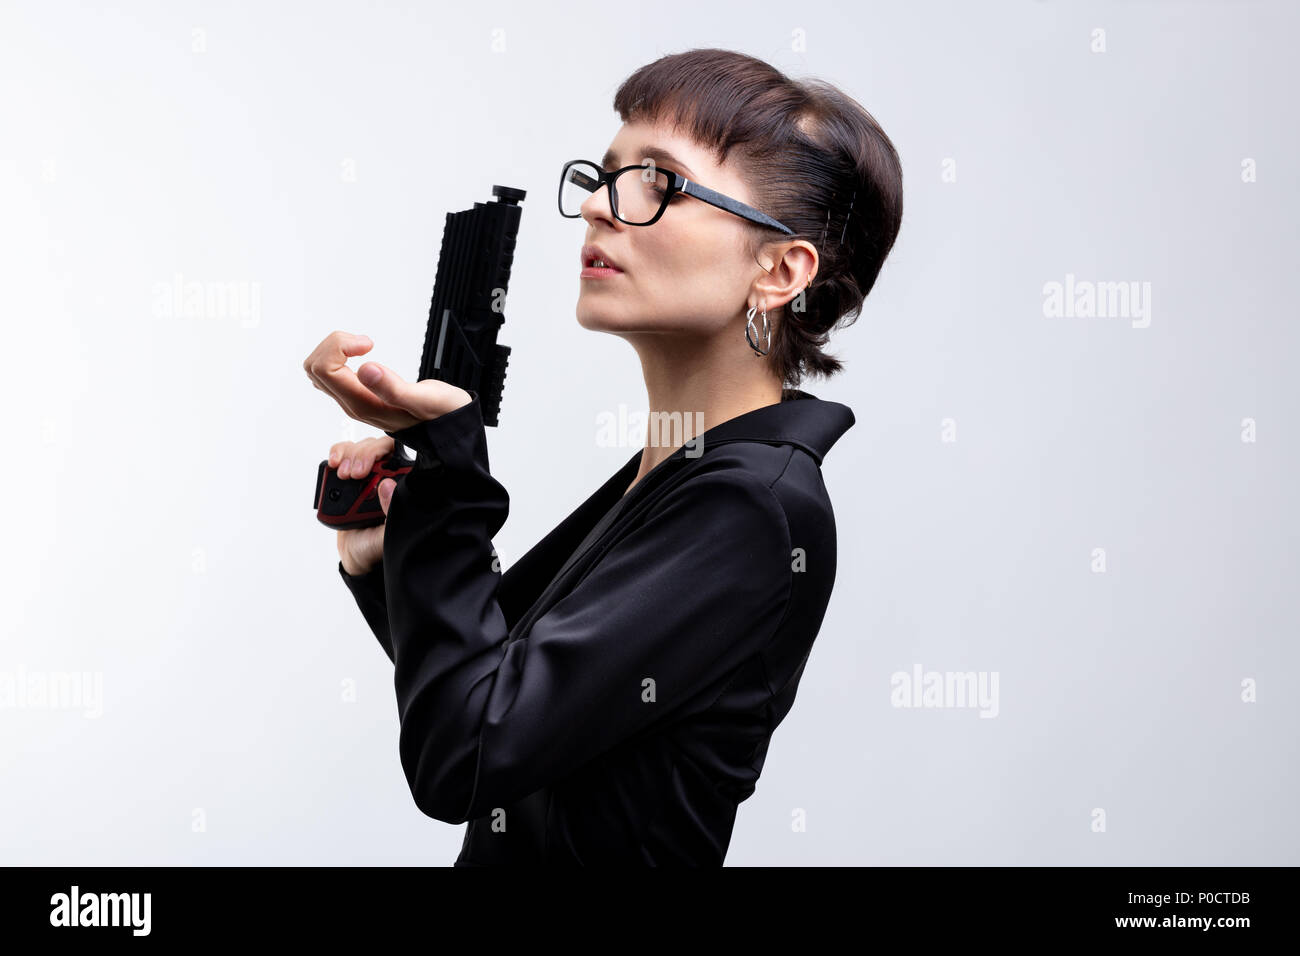 A portrait of an attractive under cover woman agent with handgun on a white background with copy space. Stock Photo